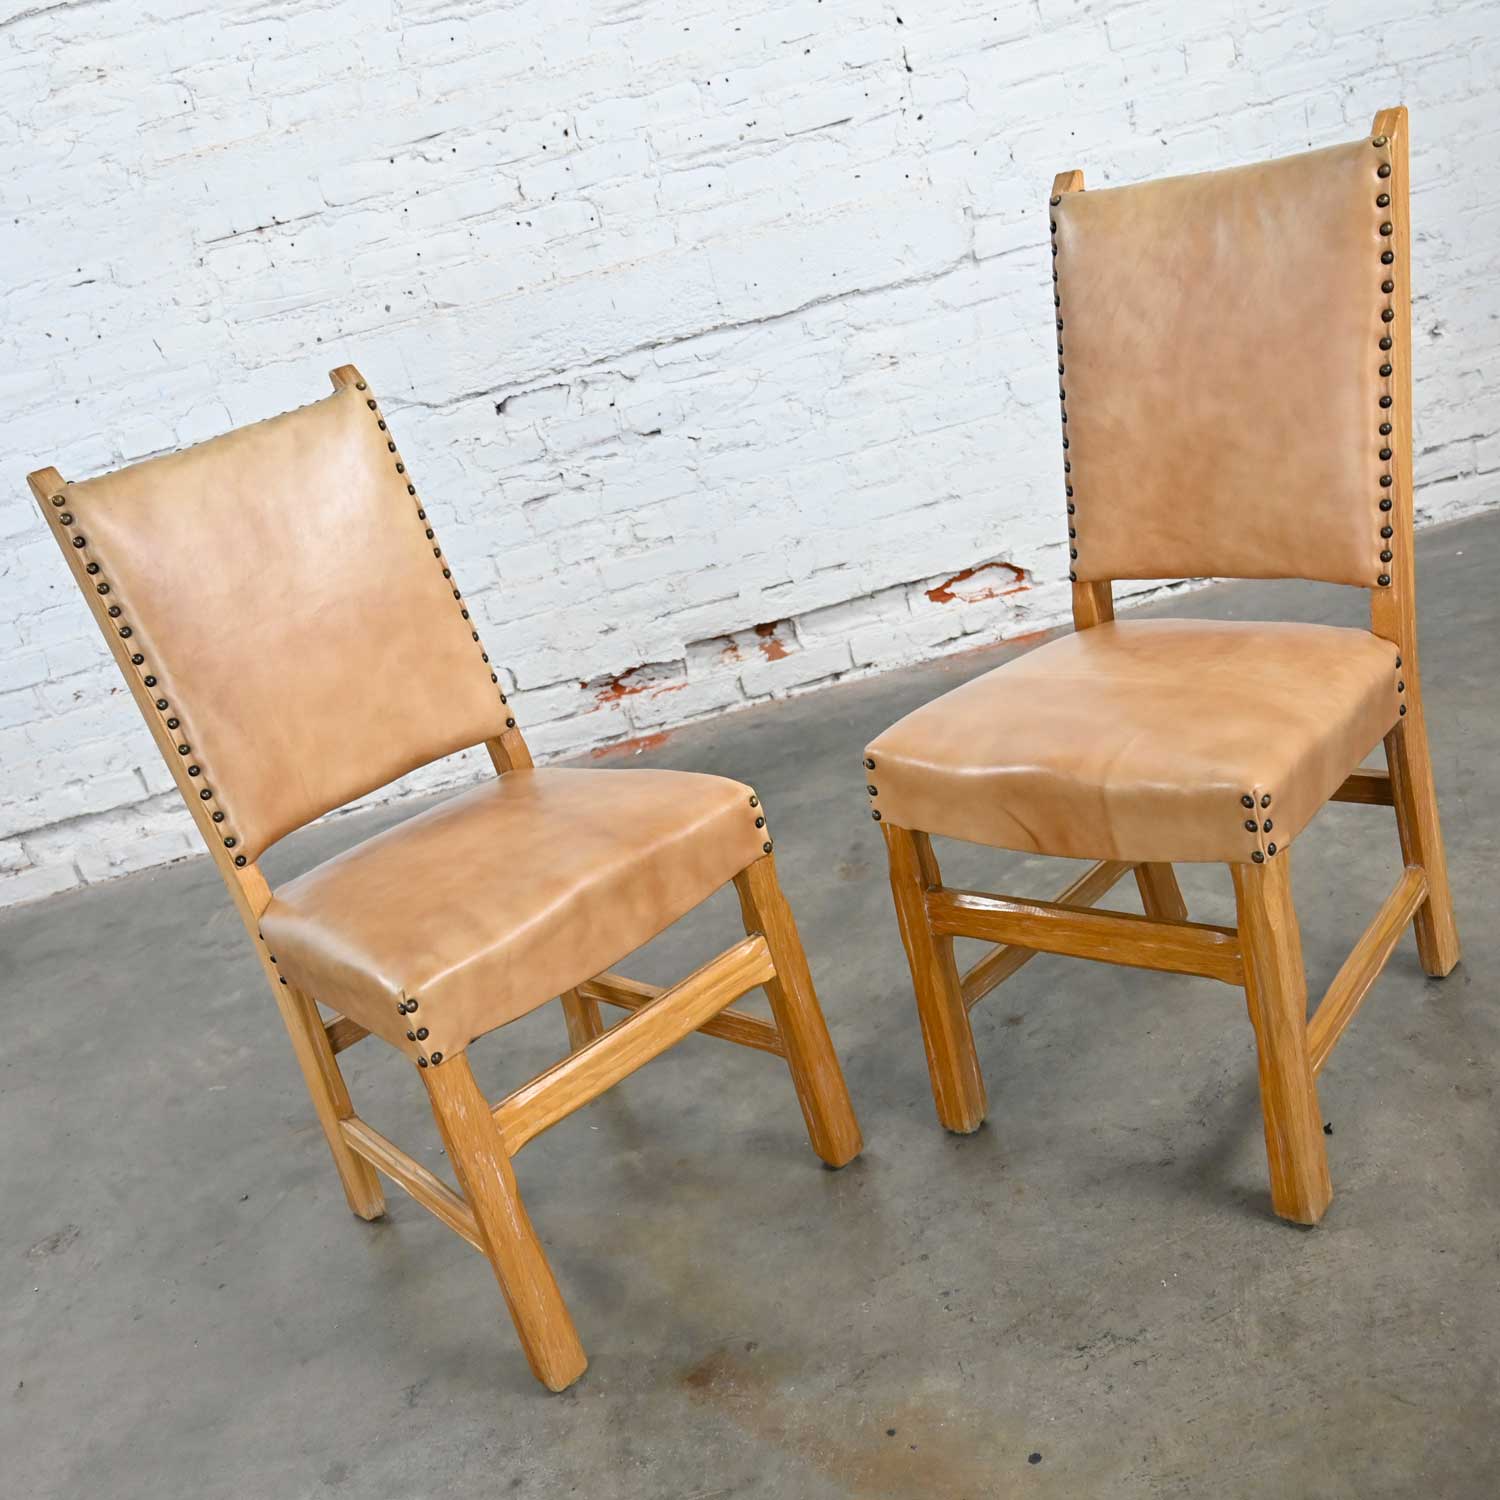 Pair of Side Chairs Beige Vinyl & Antiqued Brass Nail Head Trim Attributed to A. Brandt Ranch Oak